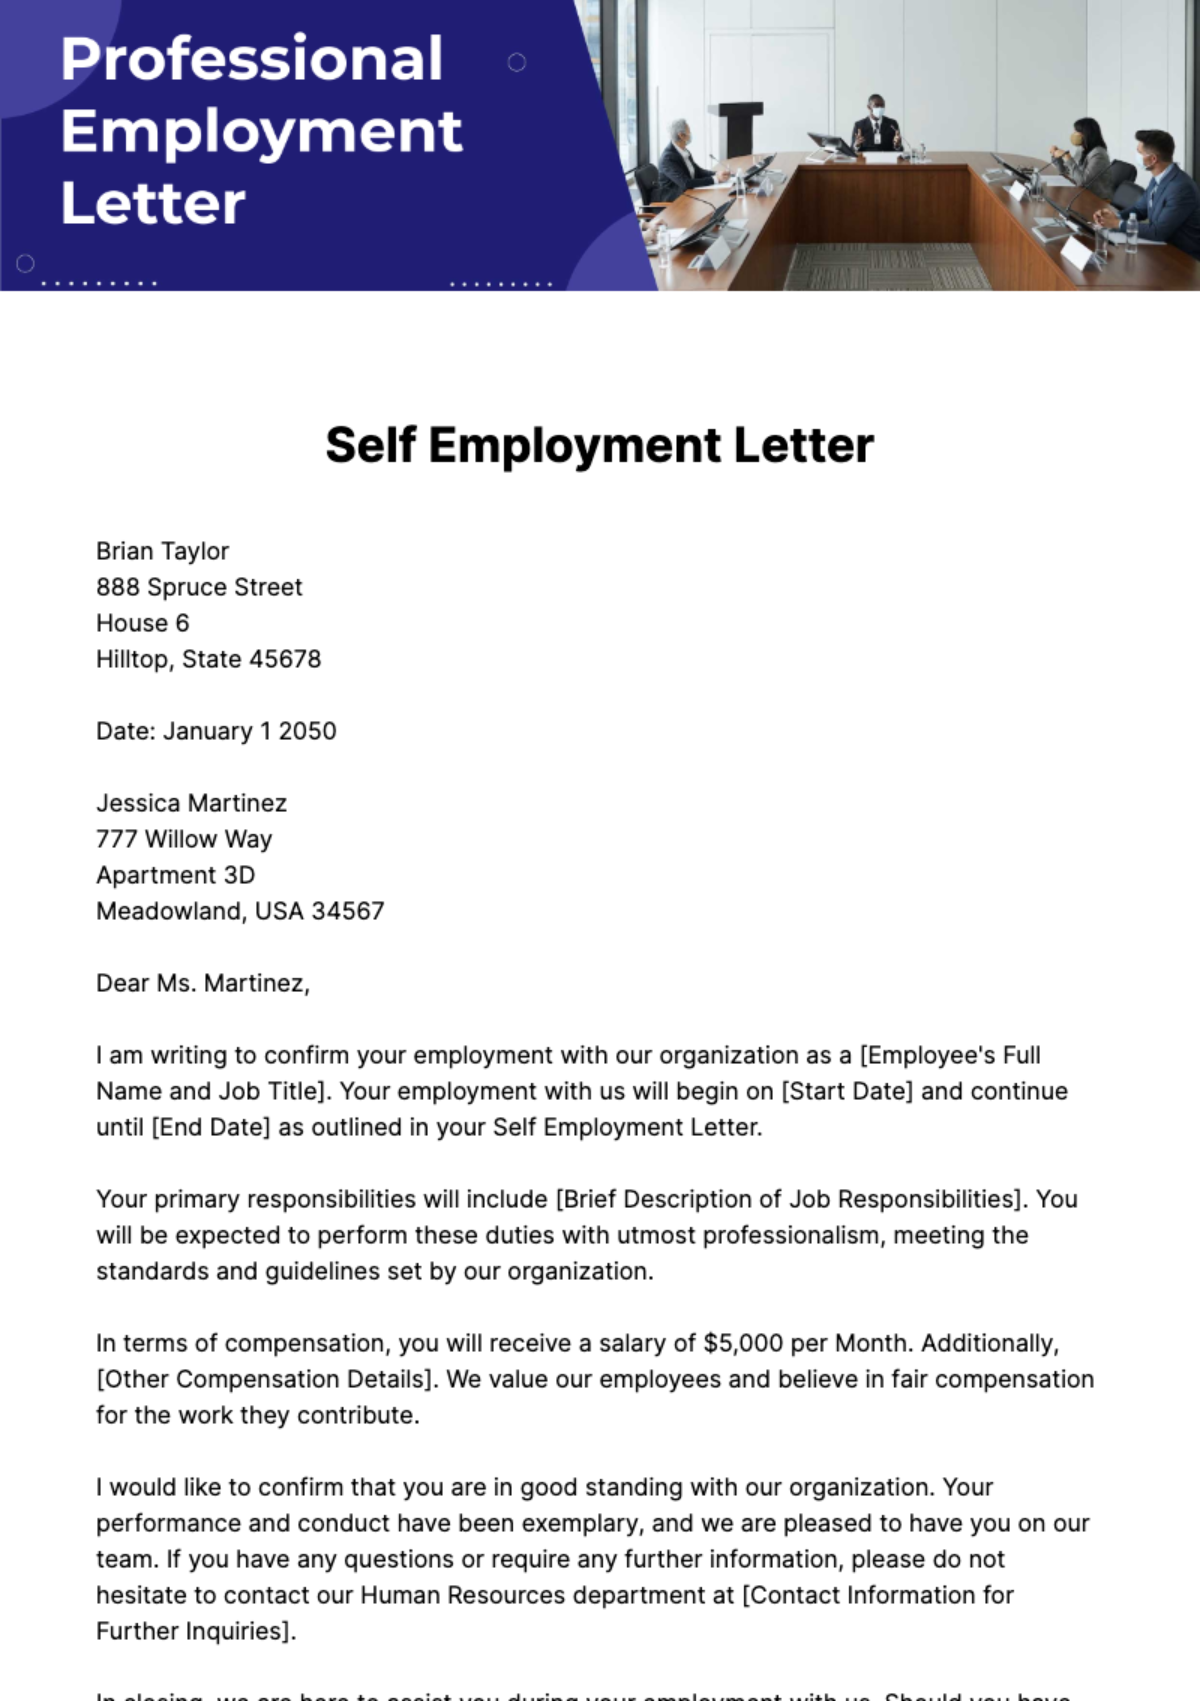 Self Employment Letter Template